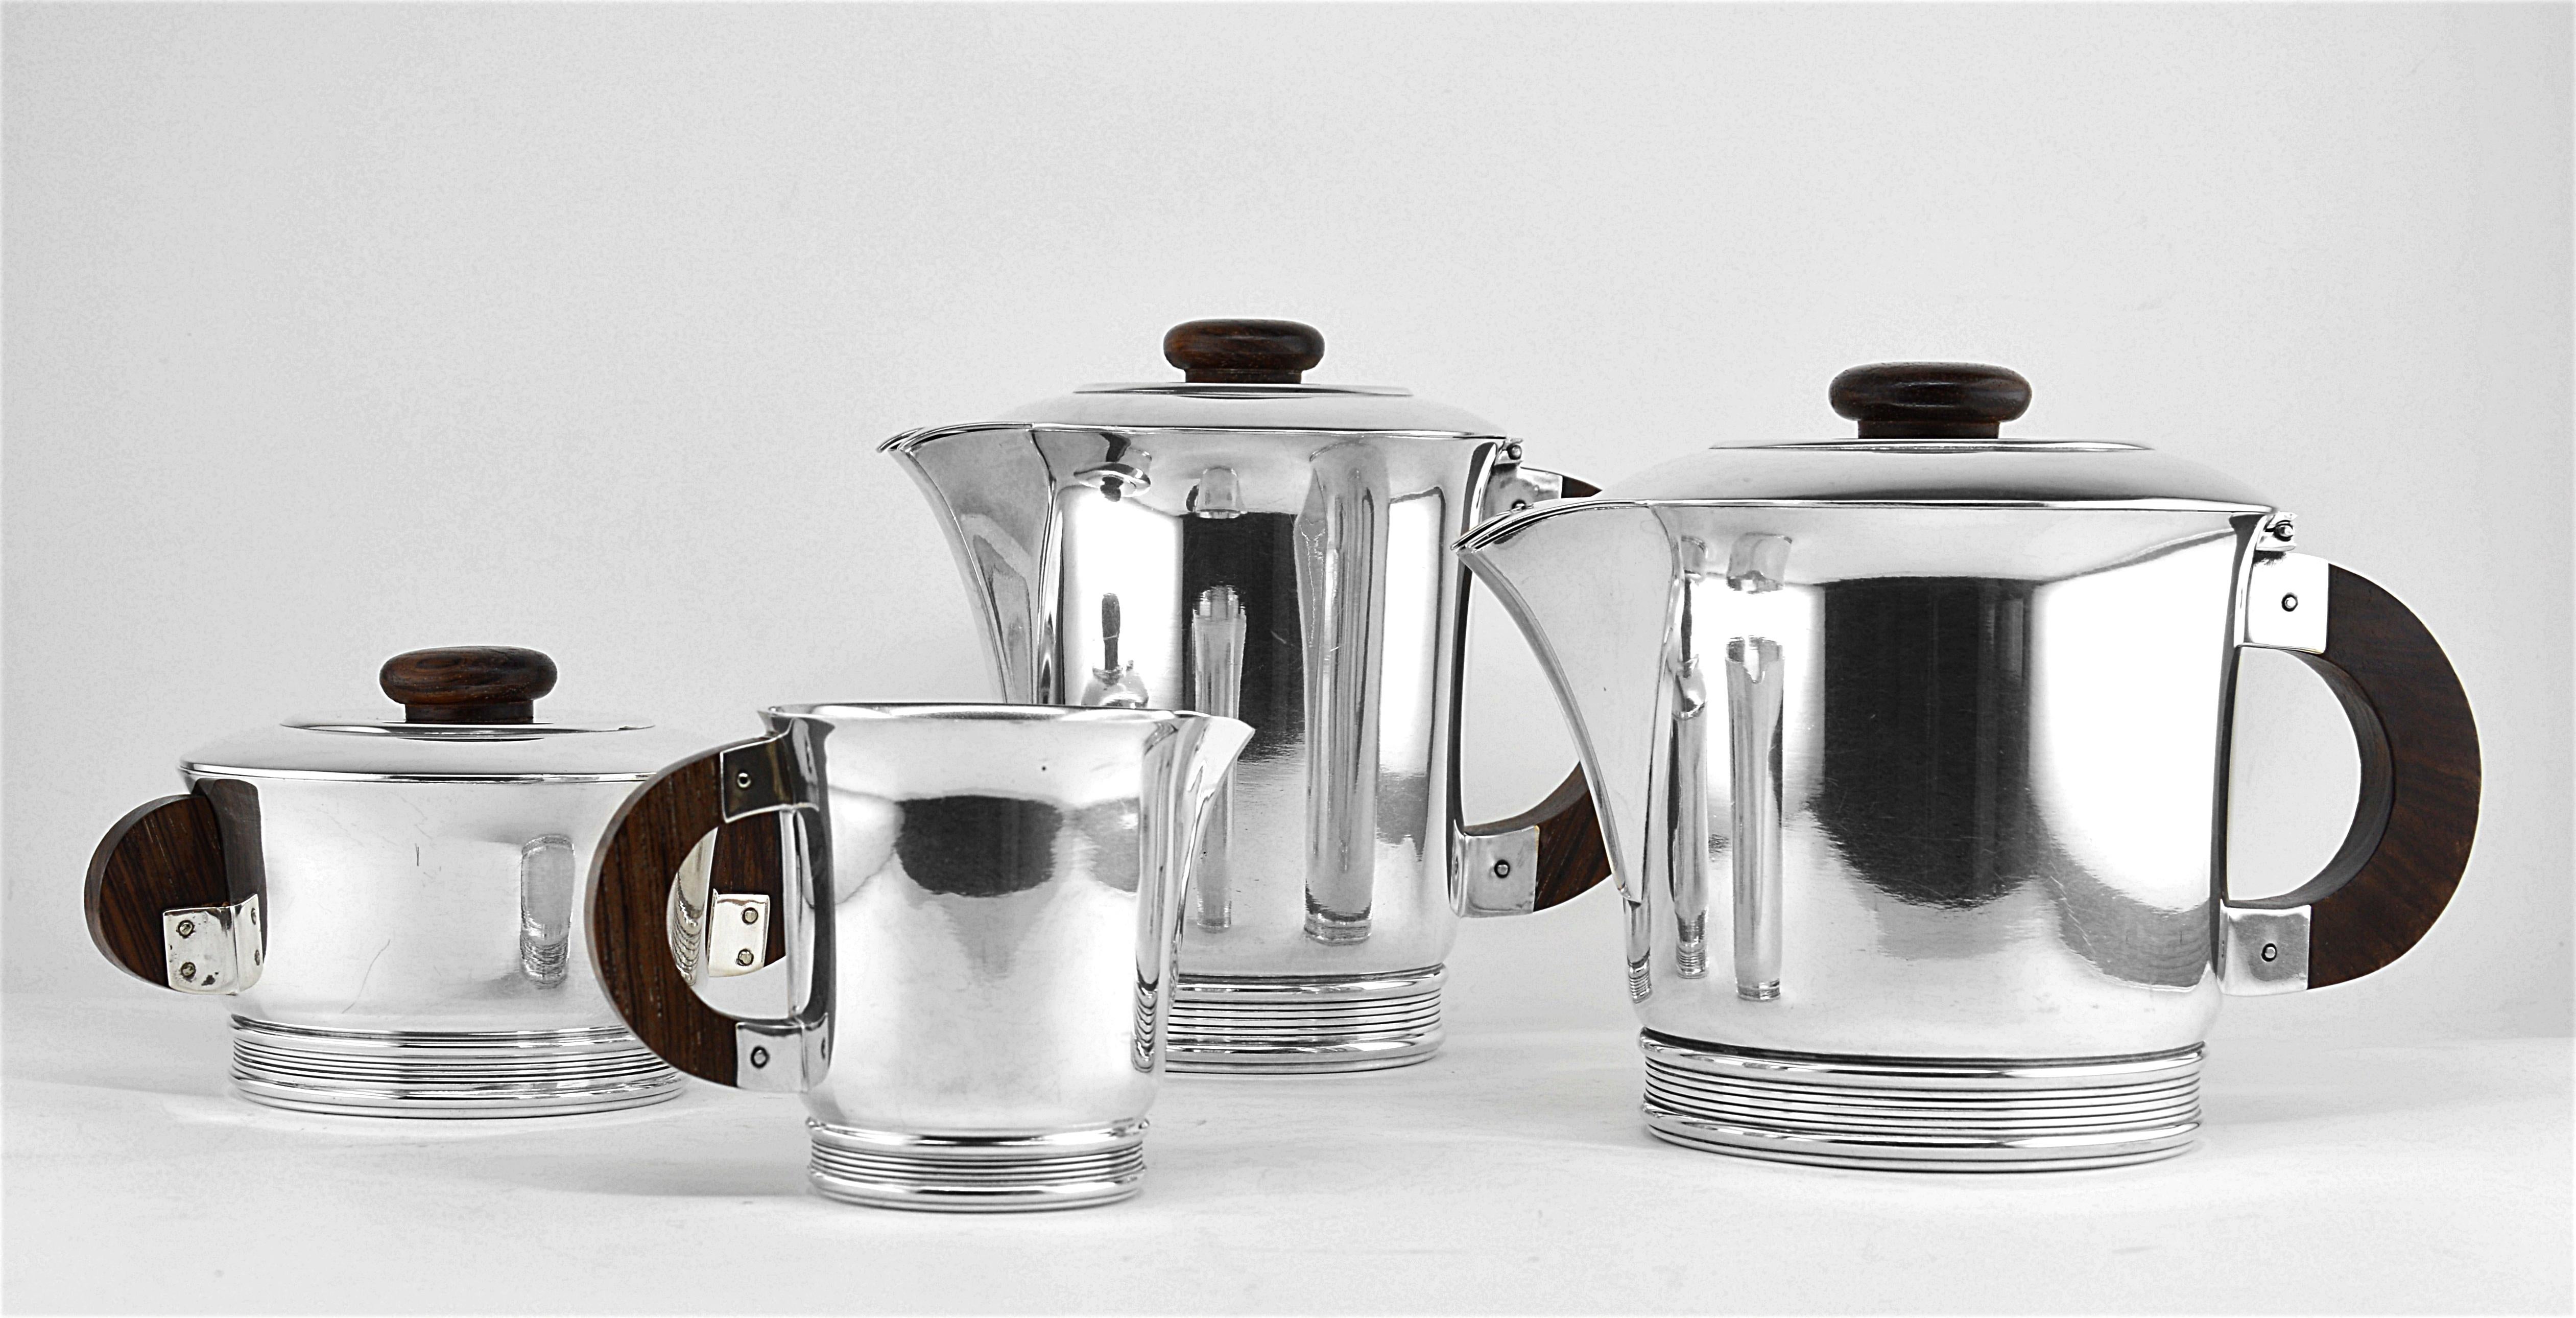 French Art Deco silver plated tea-coffee set by Ercuis, circa 1925. Macassar handles. Ercuis stamp on each piece. Great stylized set.

Measurements:
Coffee-pot H 6.1